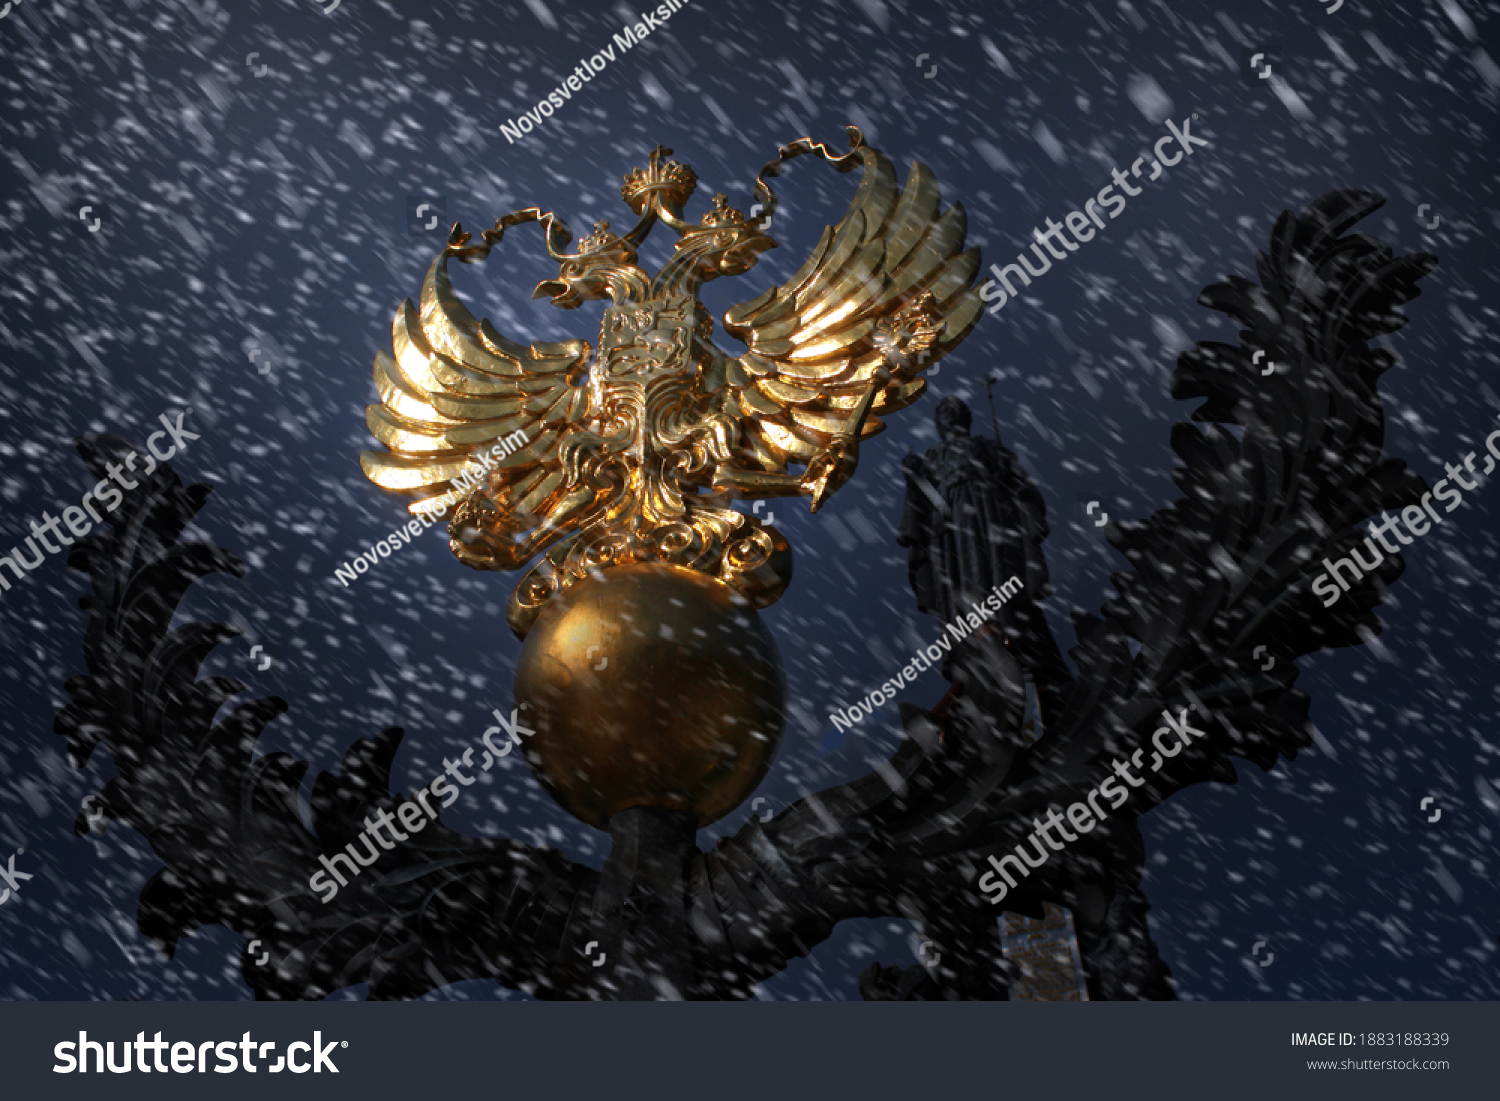 Coat of Arms of Russia is a Golden Double-Headed Eagle At night in Winter during a Snowfall. Concept Russia, News, Winter, Russian Federation, Politics, Sanctions, Moscow. #1883188339